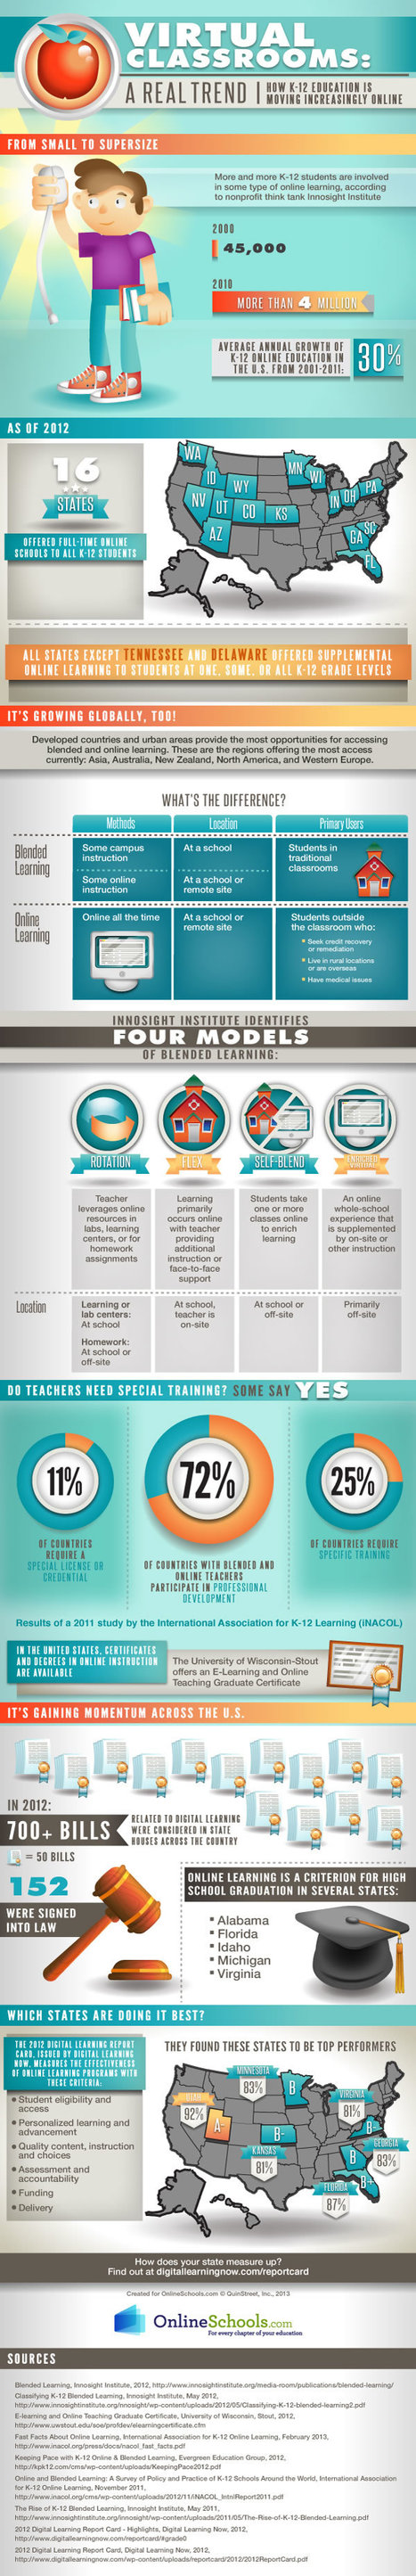 The Teacher's Quick Guide To Blended Learning [Infographic] | E-Learning-Inclusivo (Mashup) | Scoop.it